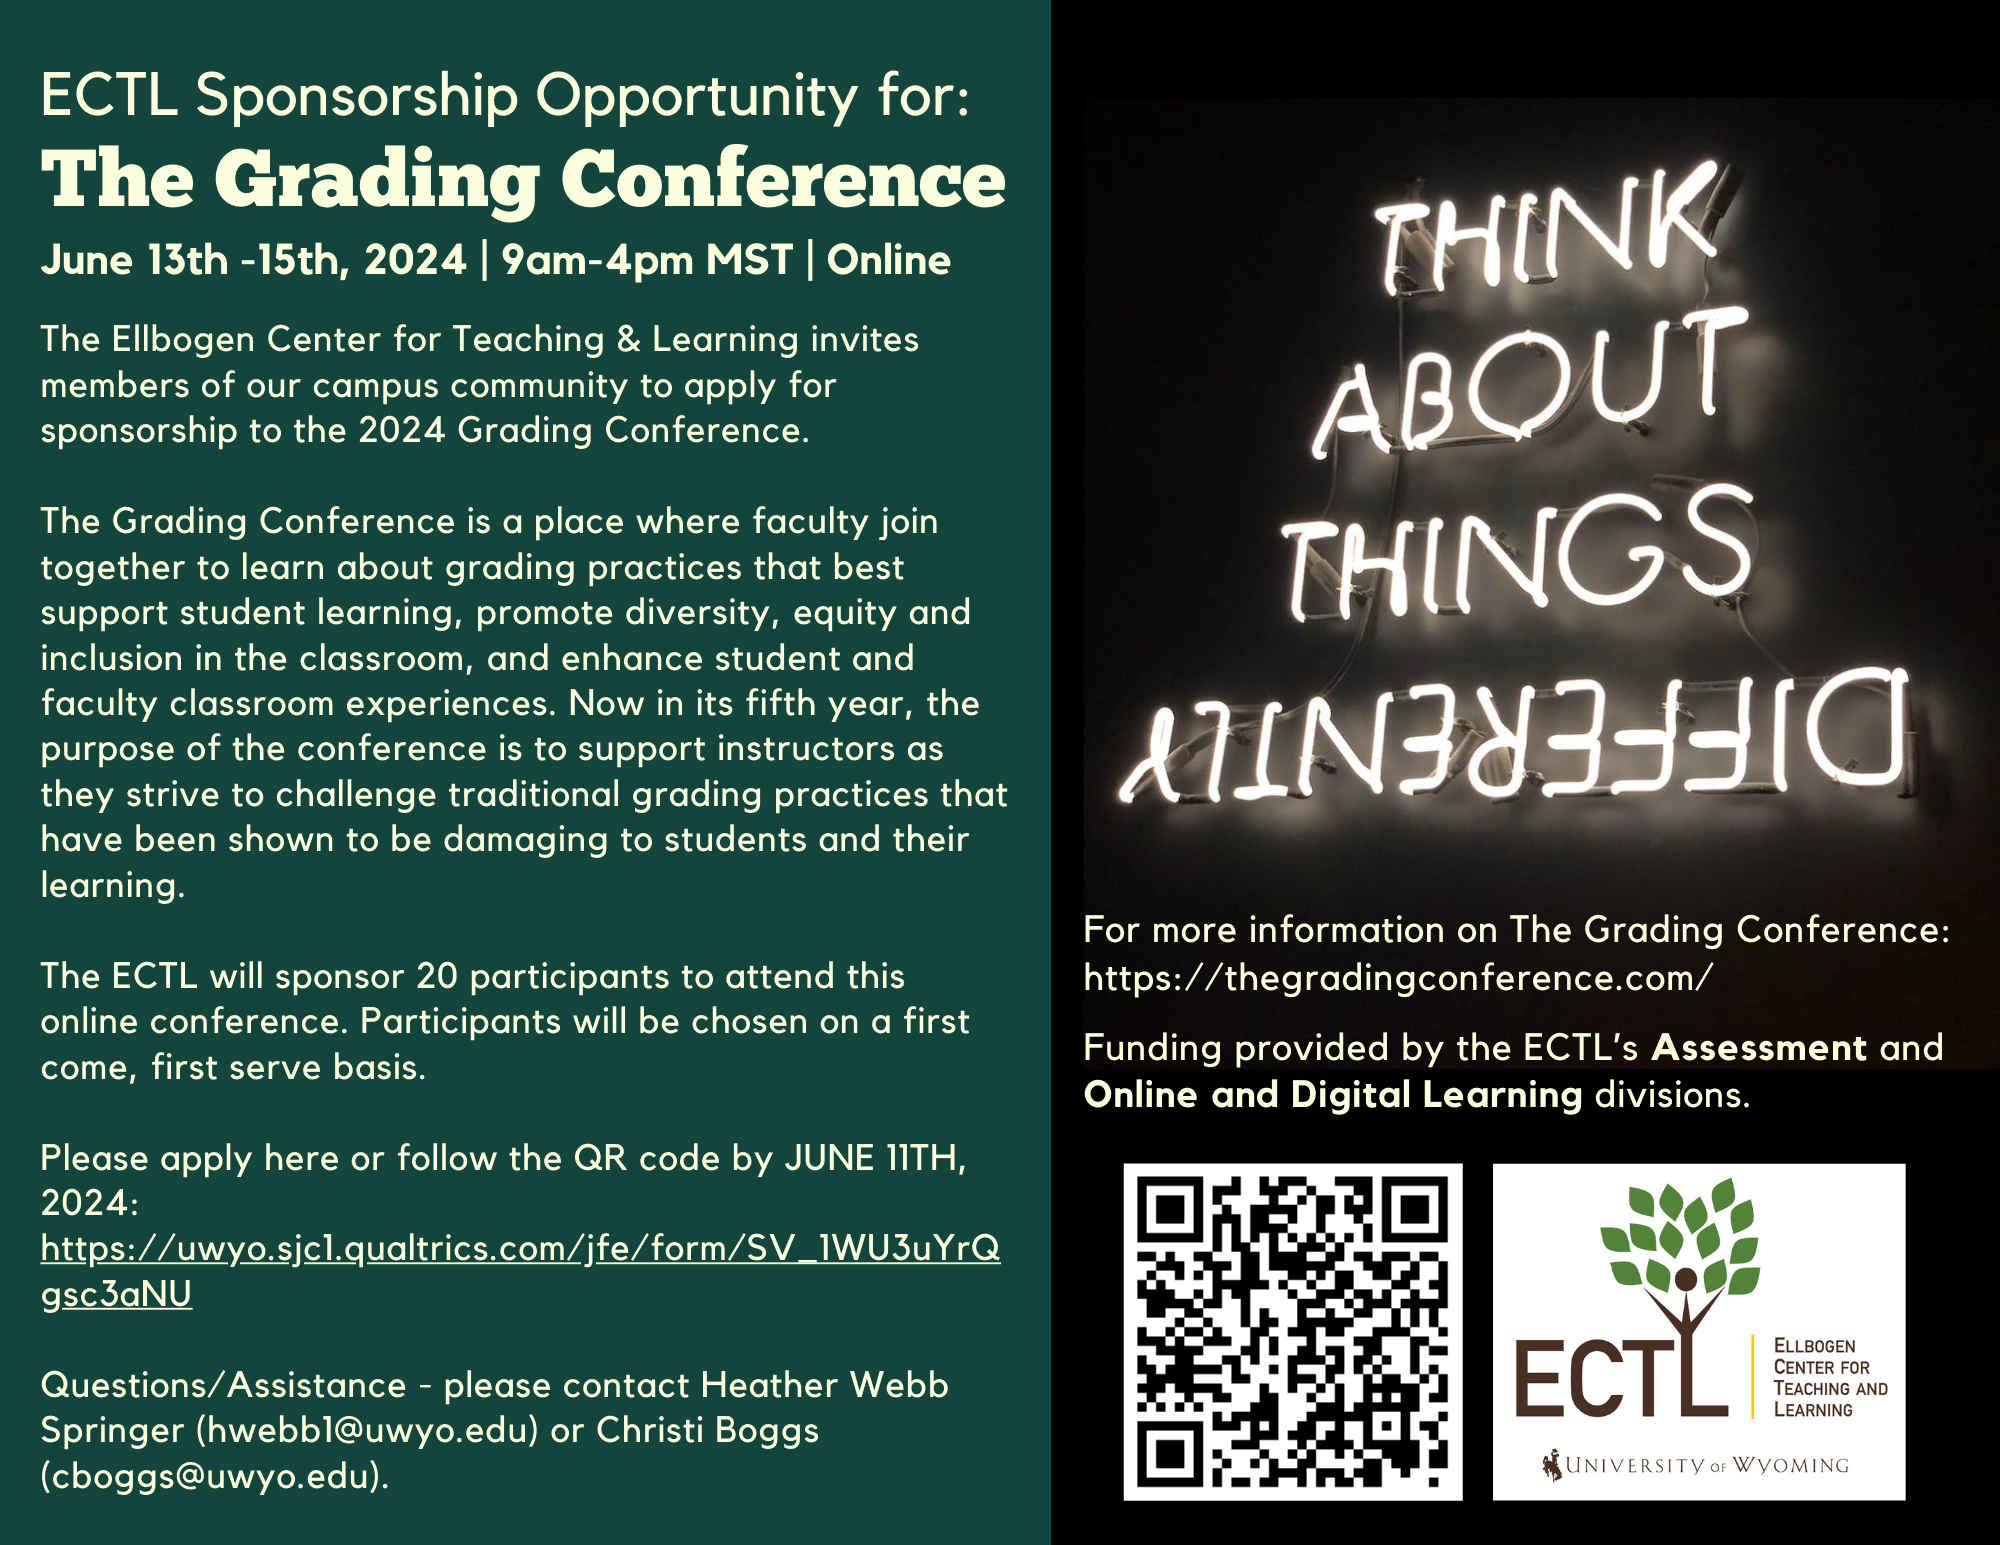 click here to view a readable pdf of the grading conference sponsorship flyer